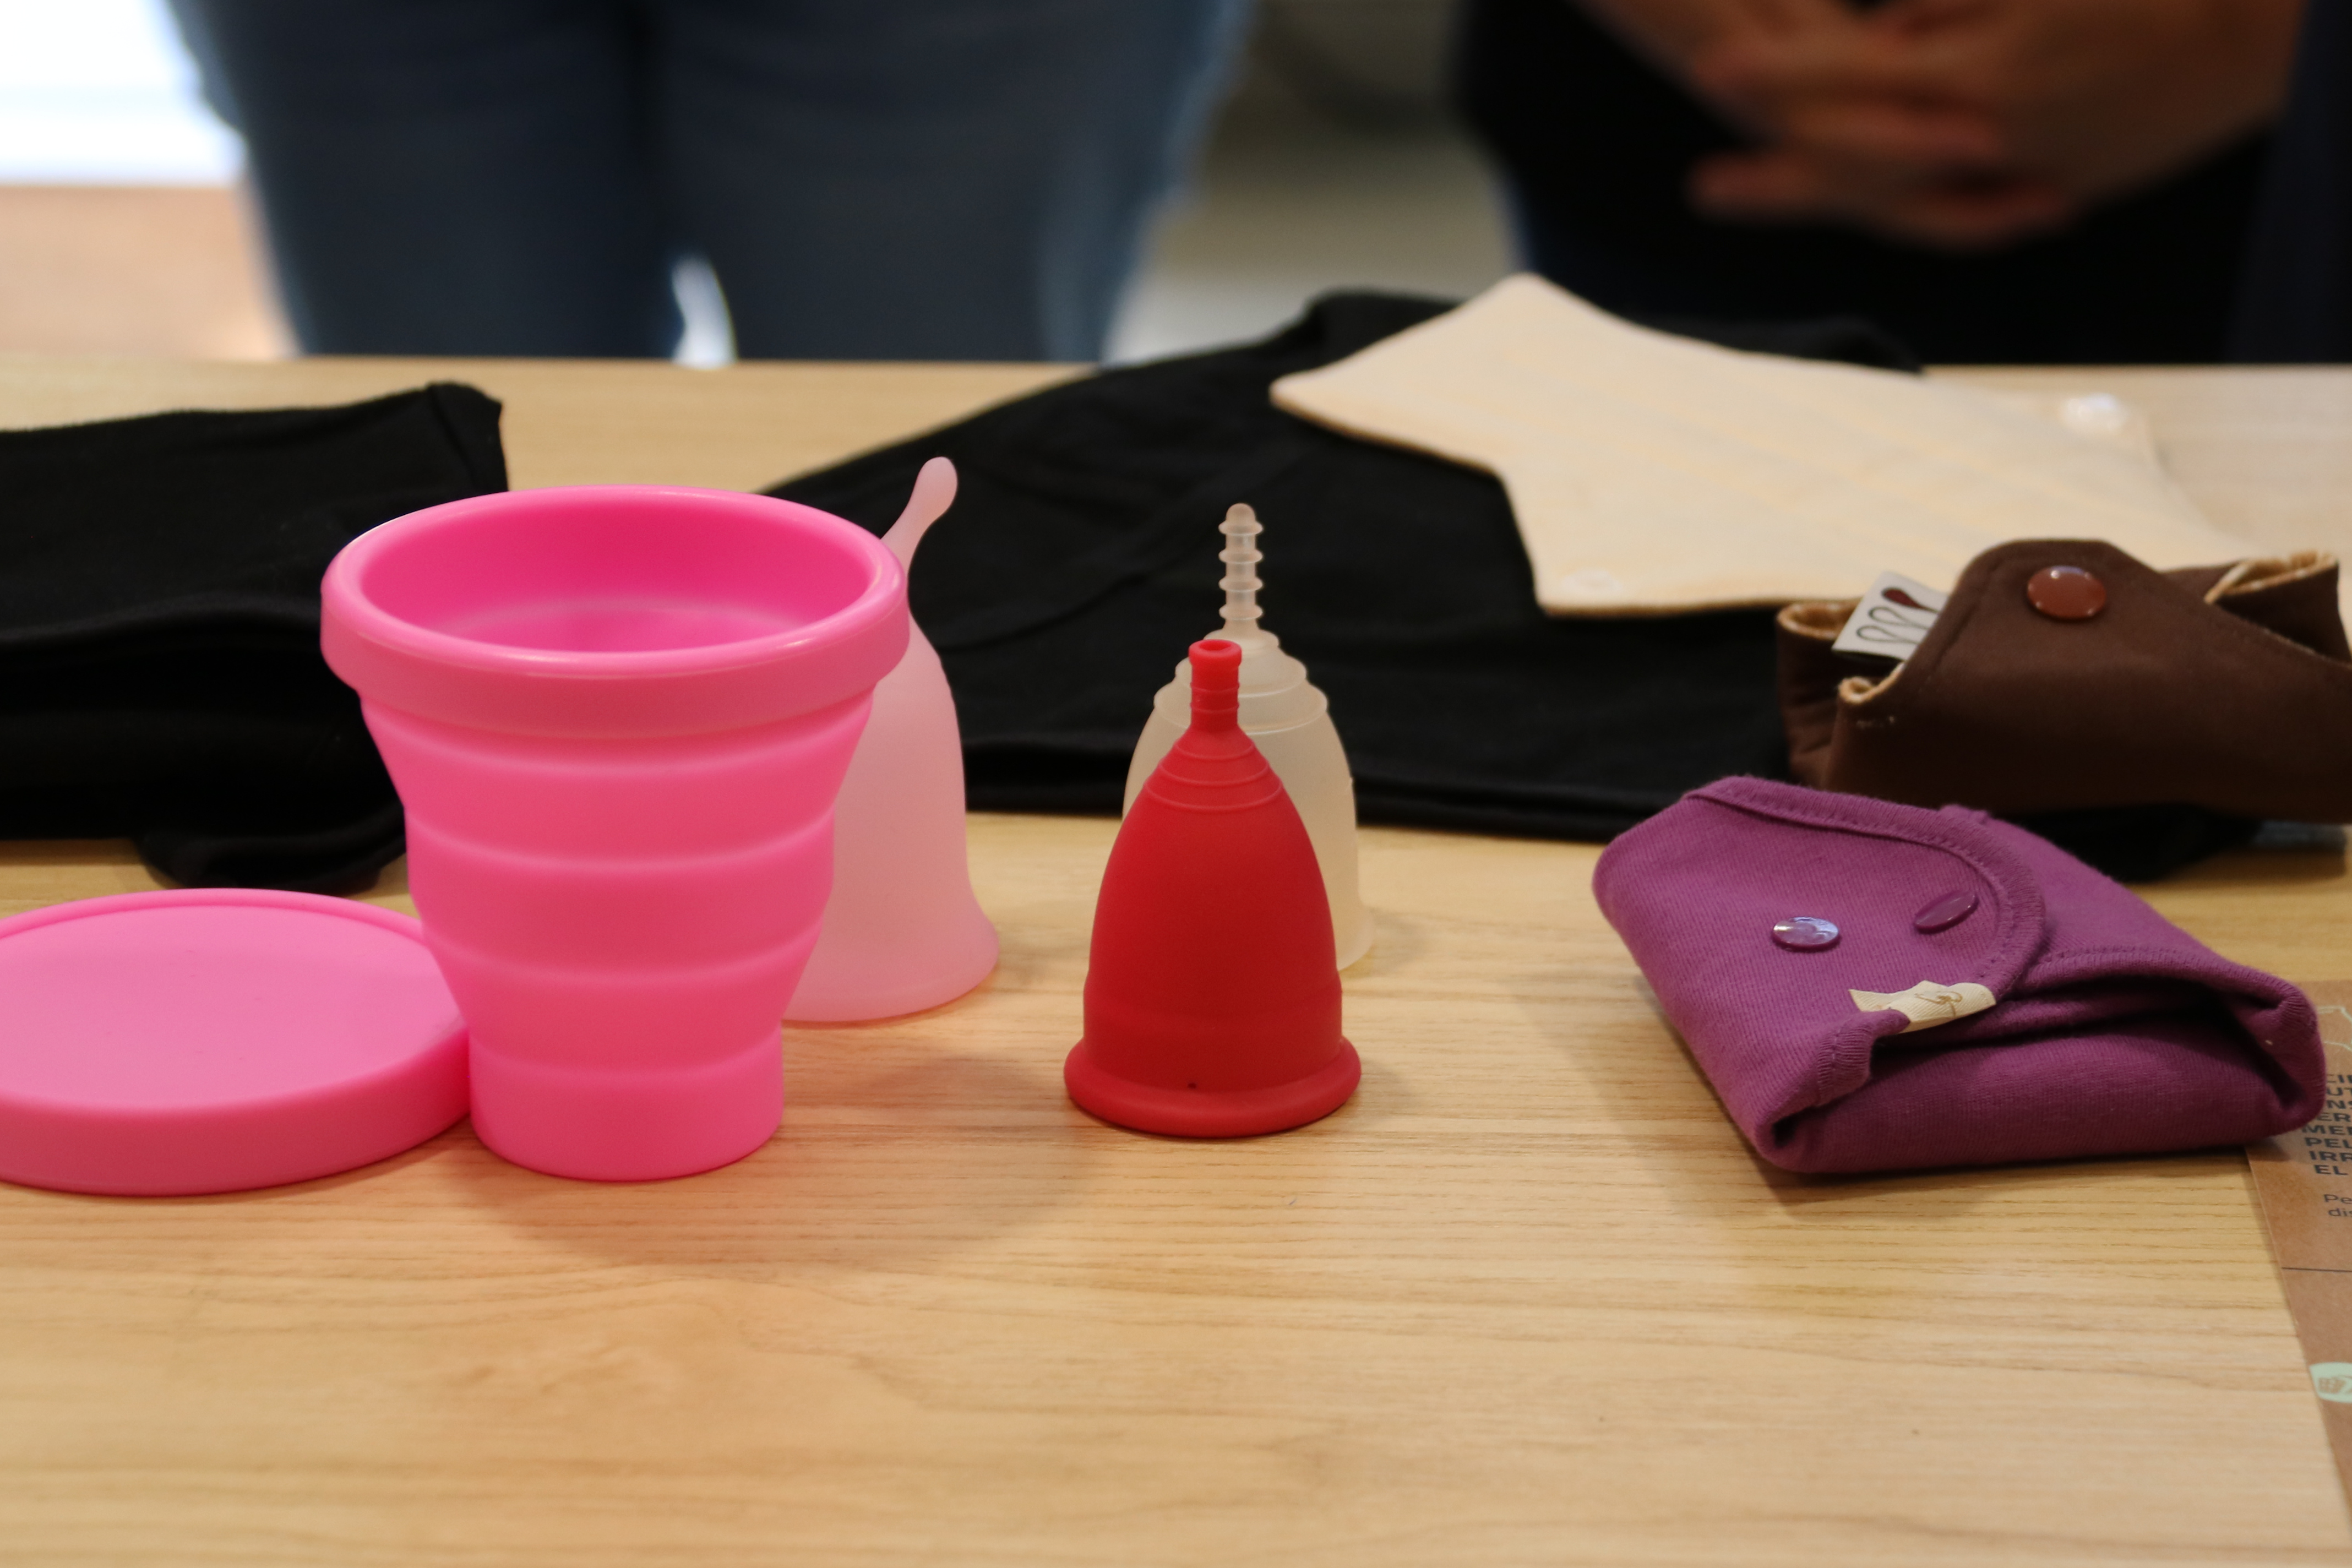 The menstrual cups, cloth pads and absorbent underwear provided